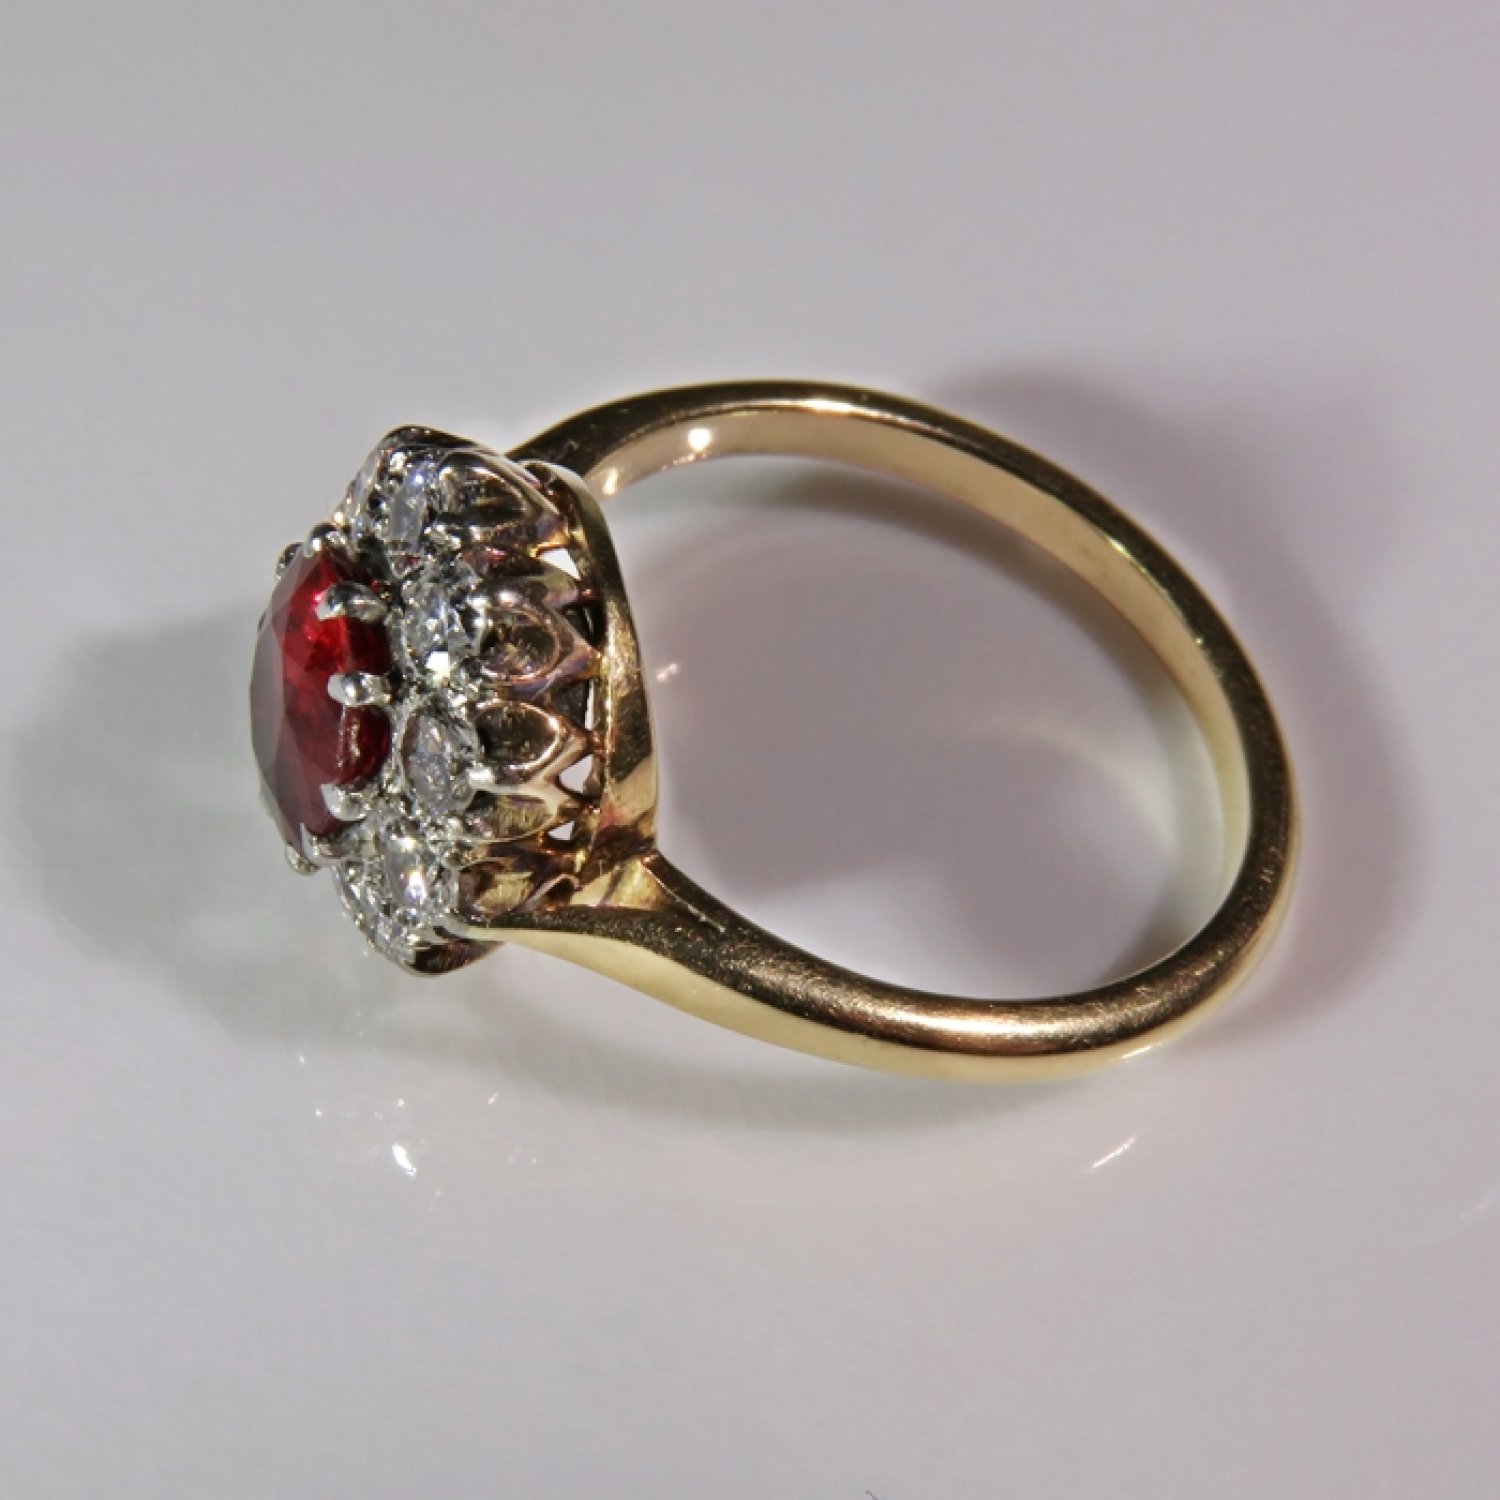 Antique Vivid Natural Unheated Red Ruby Diamond Engagement Ring Victorian Post Georgian Jewelry Ruby Anniversary Ruby Engagement Ring Wedding Ring Band Old European Cut Diamond Ring 18K Gold One of a Kind Heirloom Jewelry Cluster Gatsby 19th Century